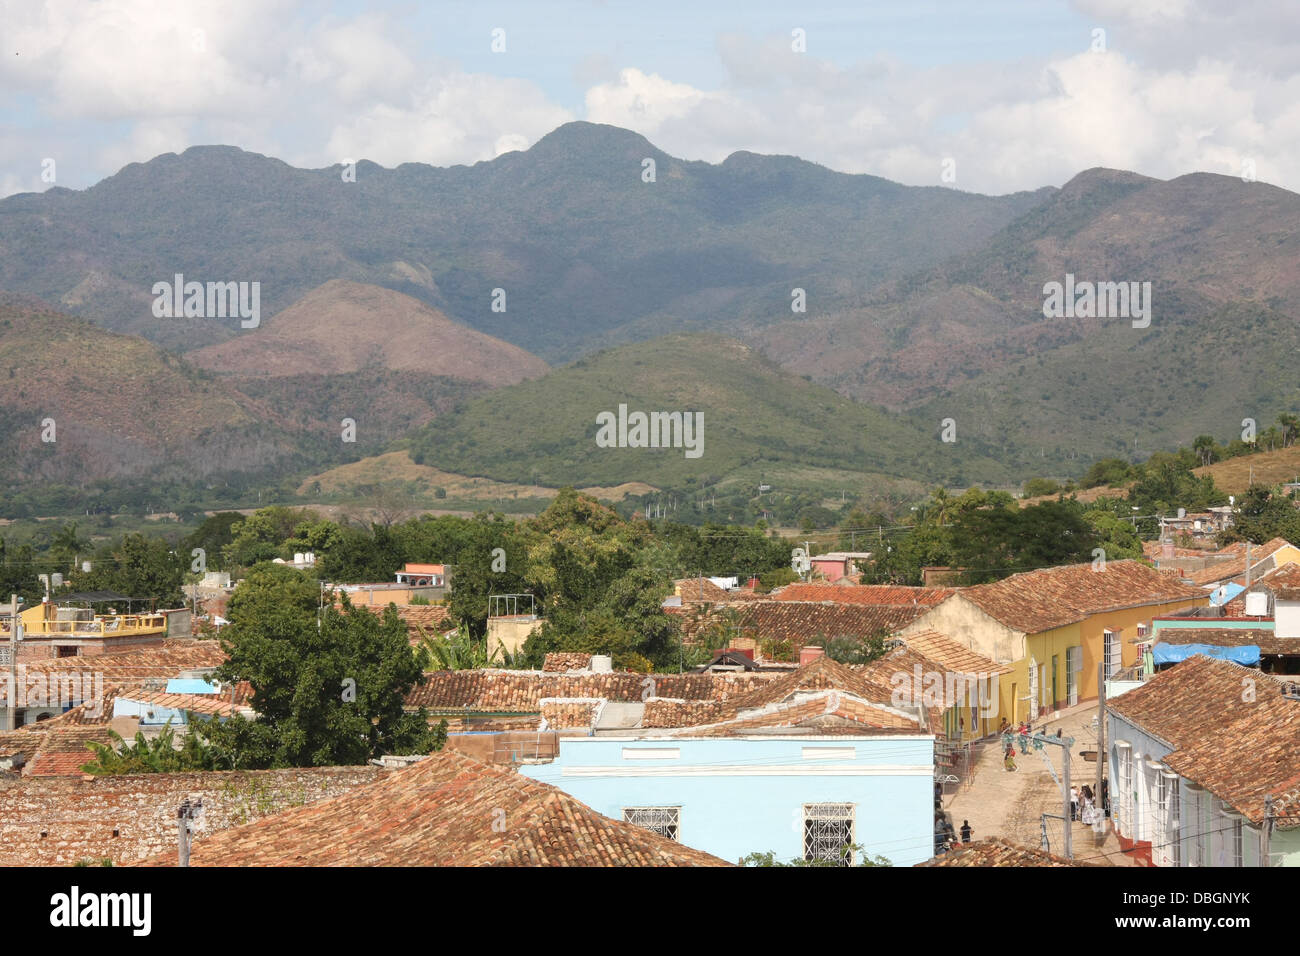 Red rooftops of Trinidad, Cuba Stock Photo